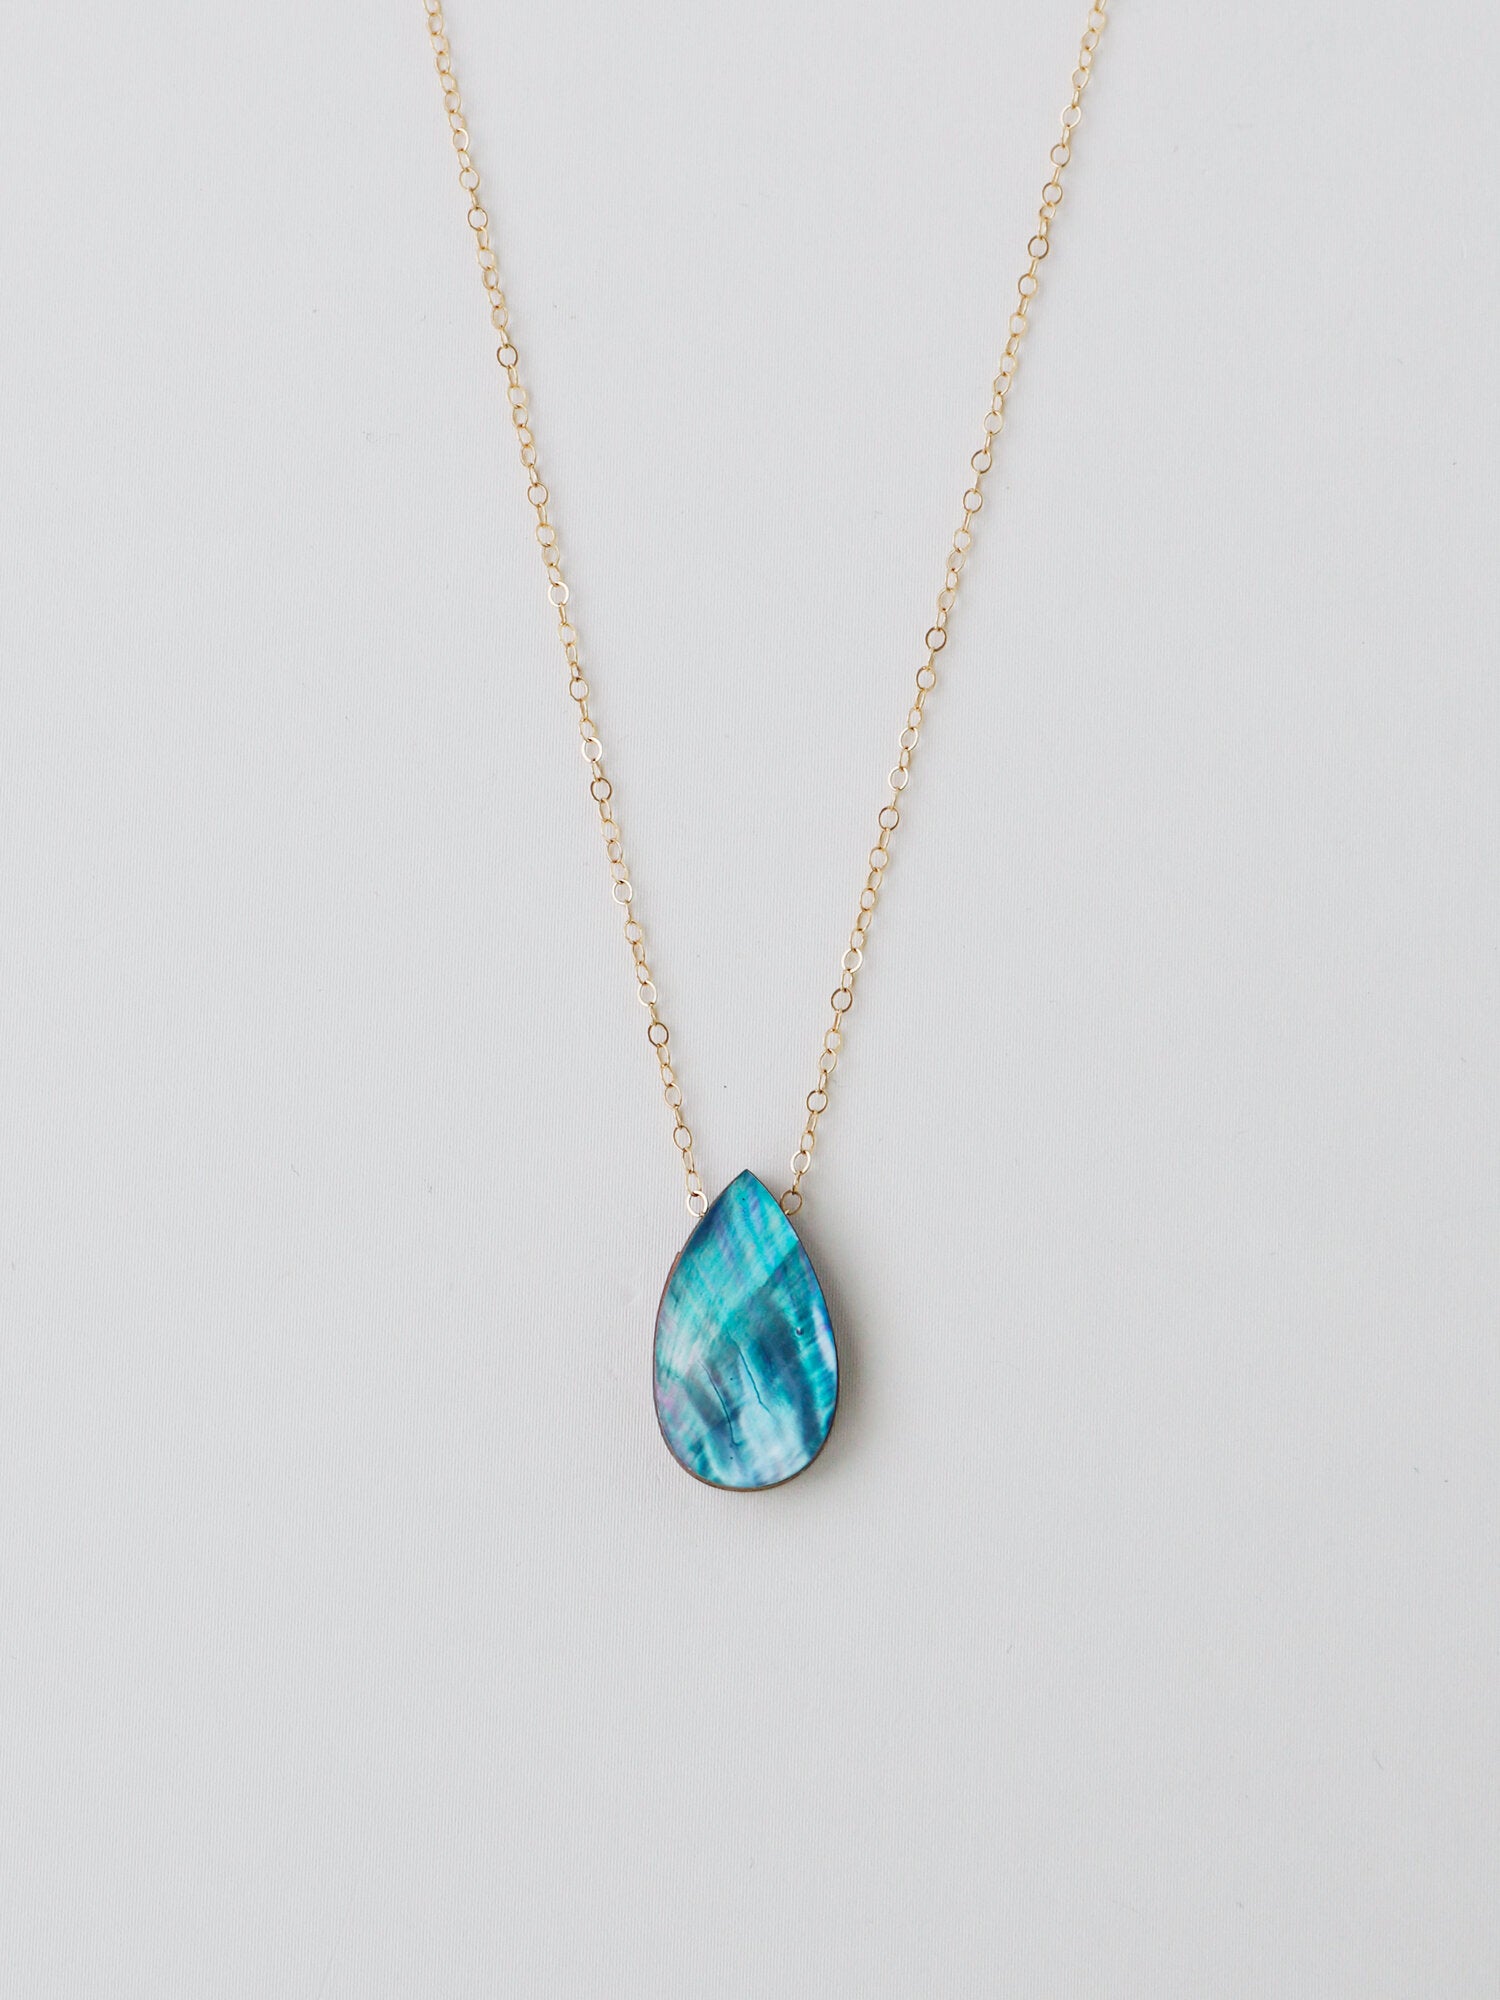 Raindrop Necklace | Sea Blue Shell | by Wolf & Moon - Lifestory